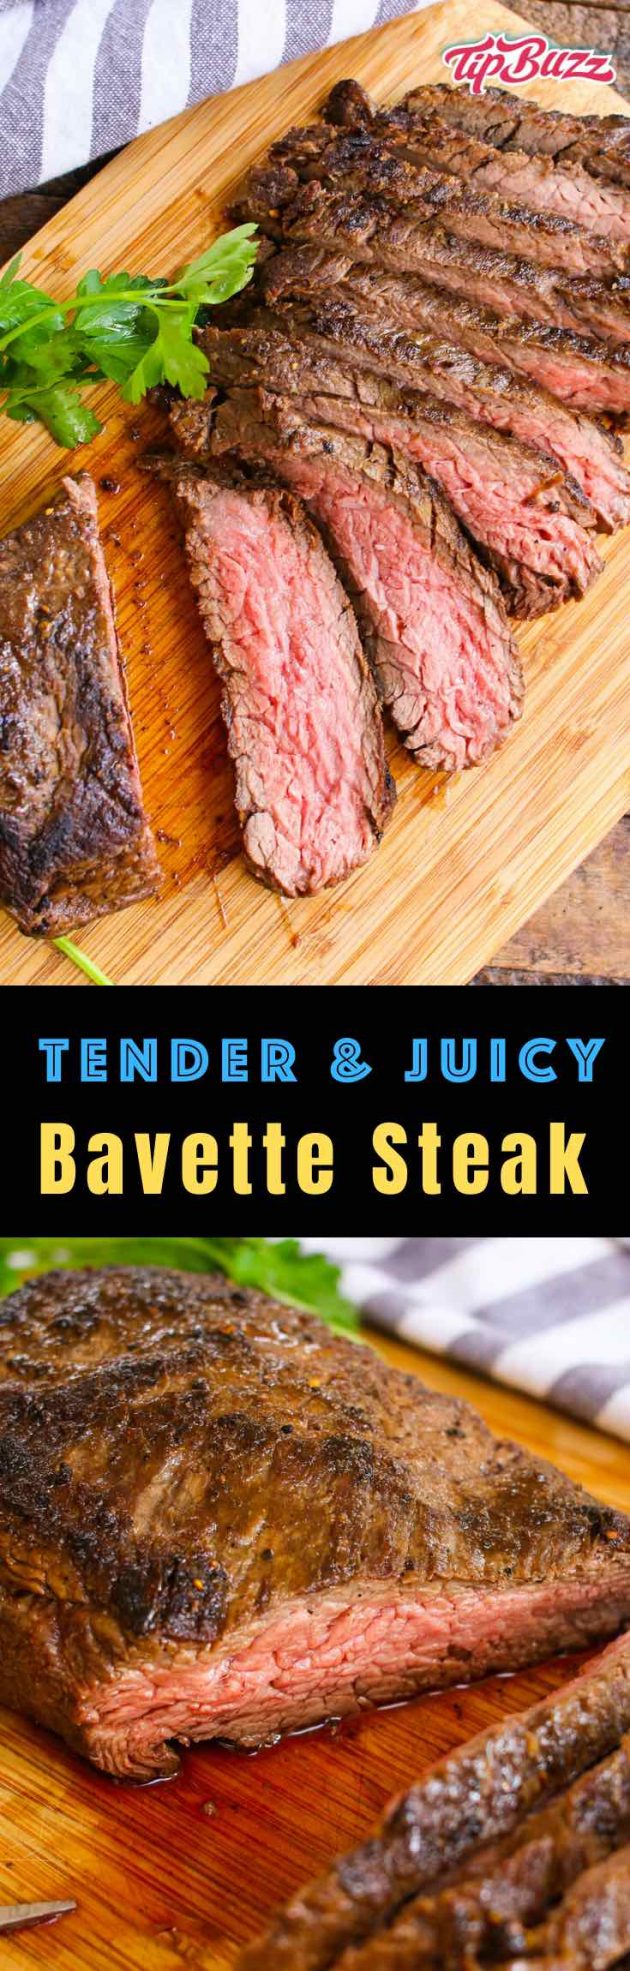 Bavette Steak is a flat cur of beef from the bottom sirloin juicy cut from the bottom sirloin that's tender, juicy and flavorful. You can cook it with or without marinating for a delicious dinner that's easy to prepare and budget friendly! #bavette